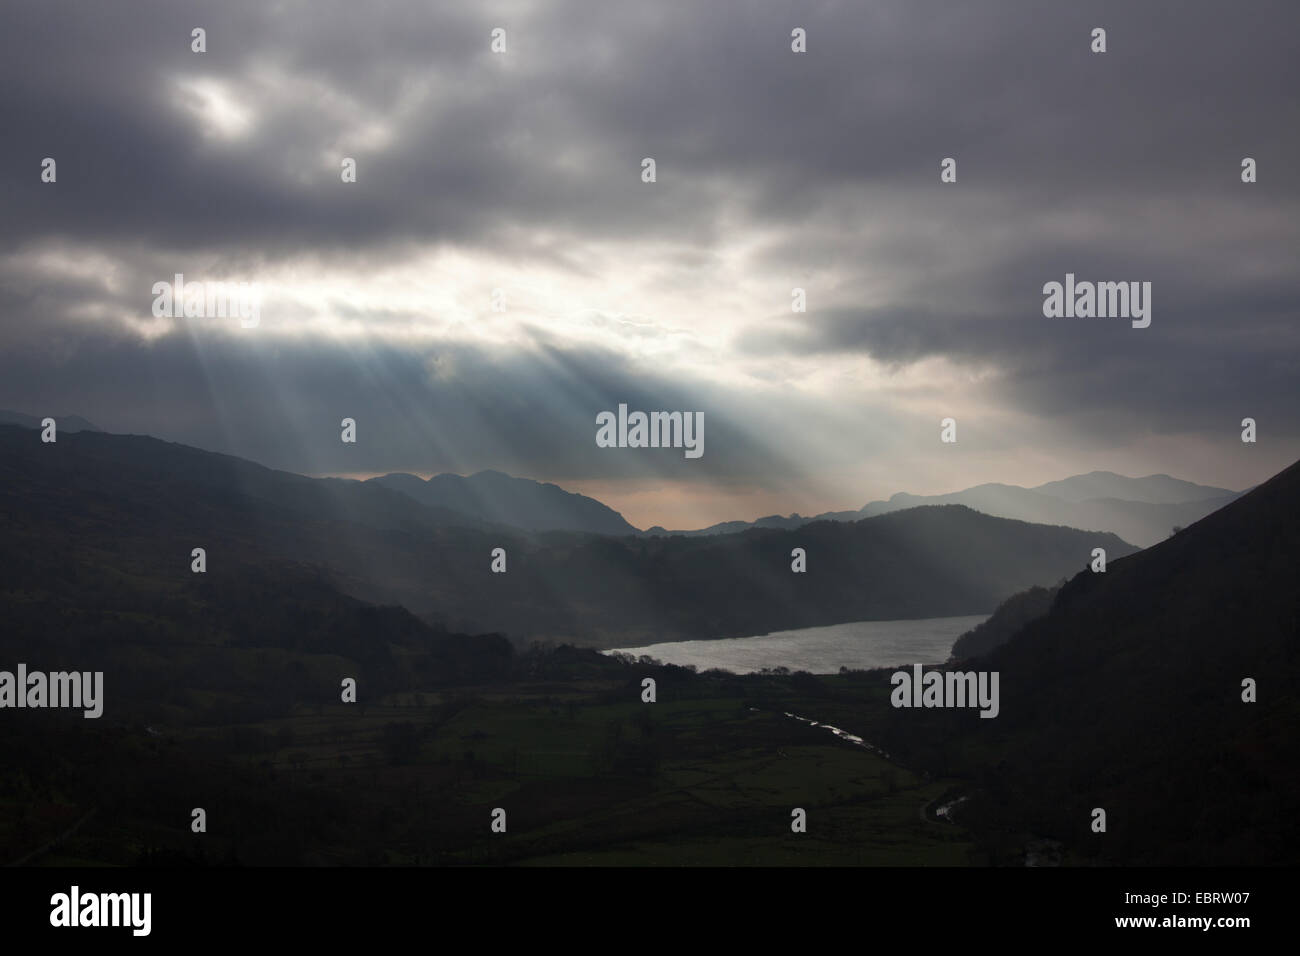 Nant Gwynant, Gwynedd, Wales. Dramatic picturesque view of Nant Gwynant valley in the late autumn. Stock Photo